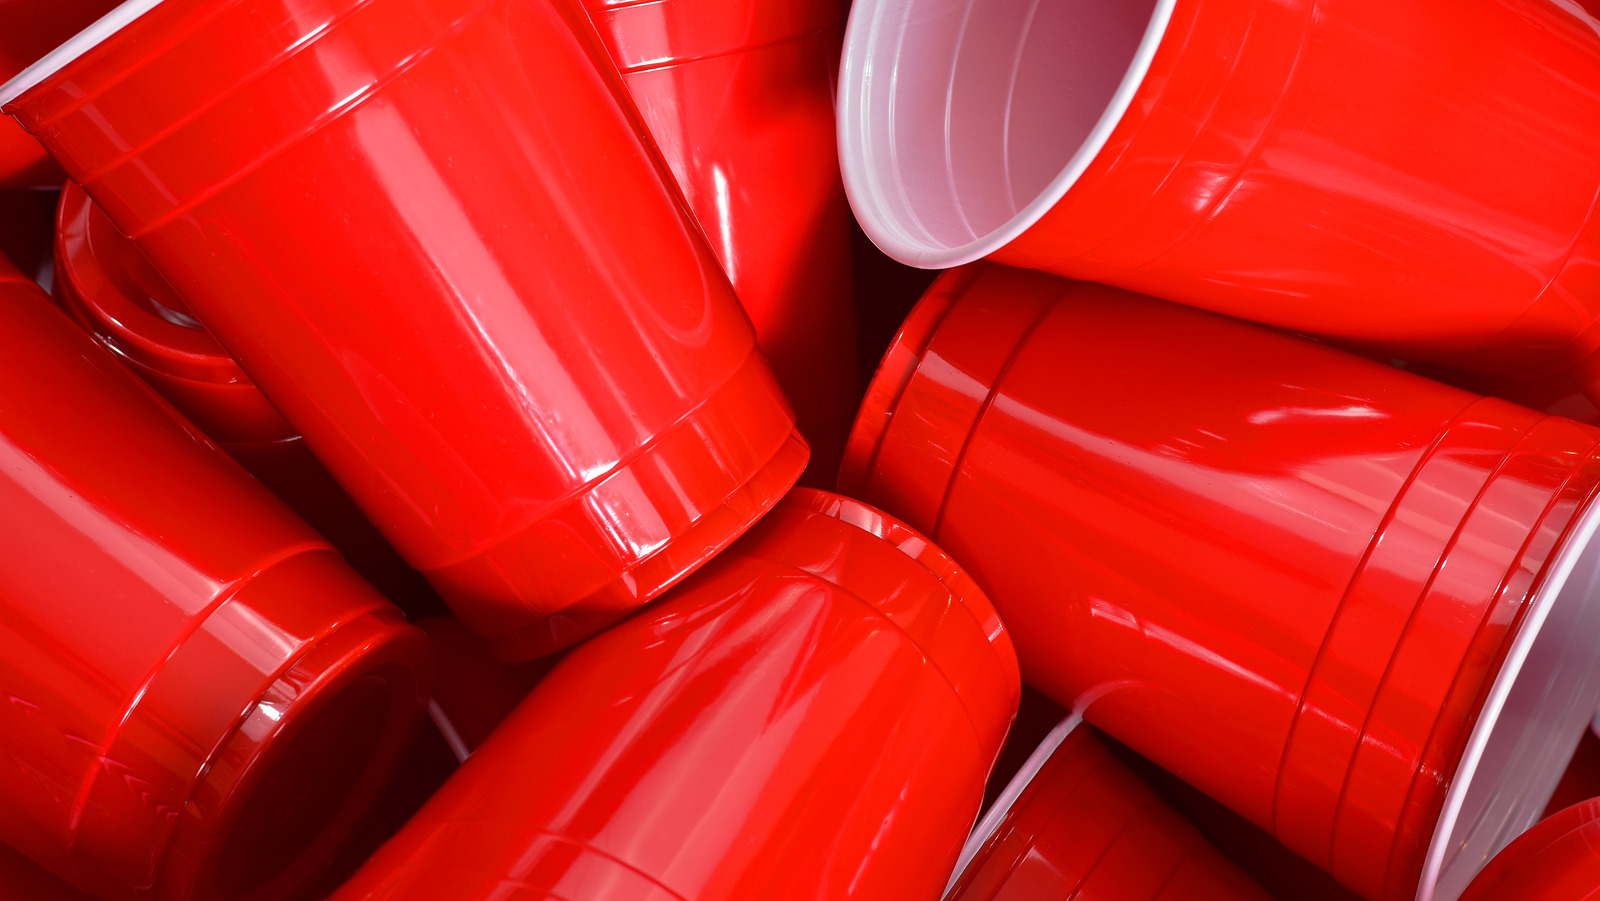 https://www.thedailymeal.com/img/gallery/the-history-of-the-illustrious-red-solo-cup/l-intro-1676390827.jpg